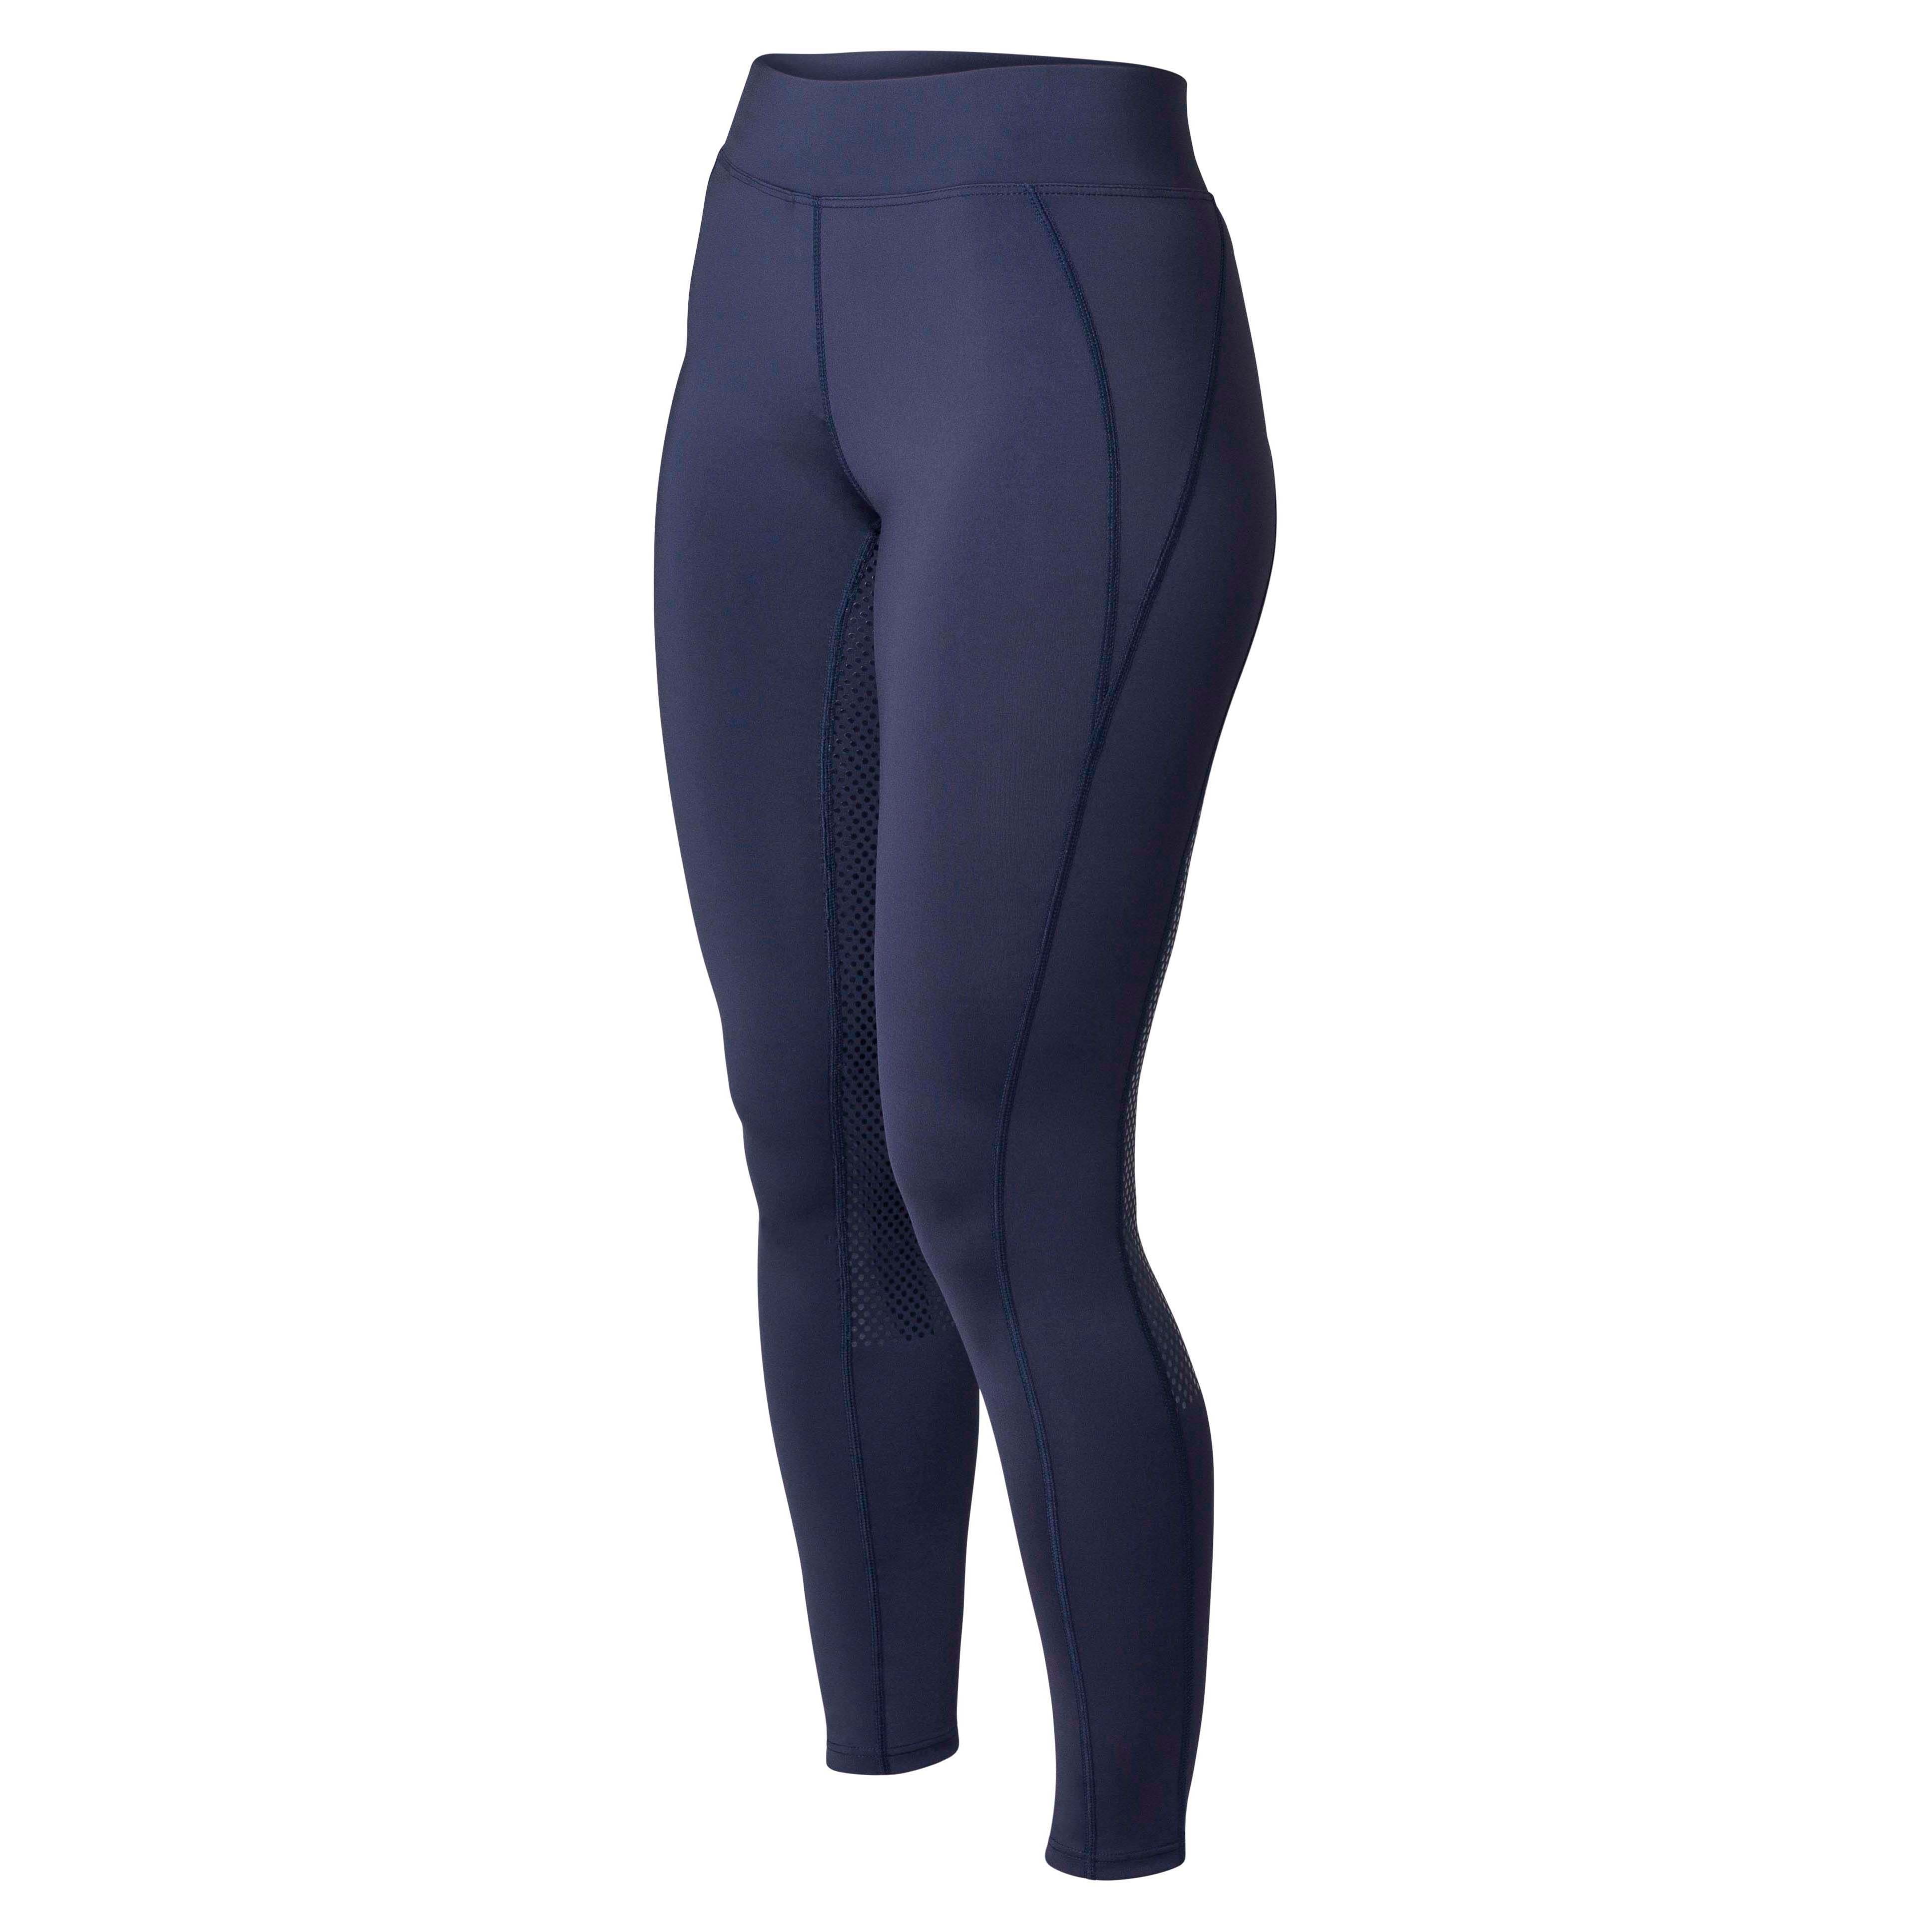 Horseware Signature Womens Pants Riding Tights Navy All Sizes 